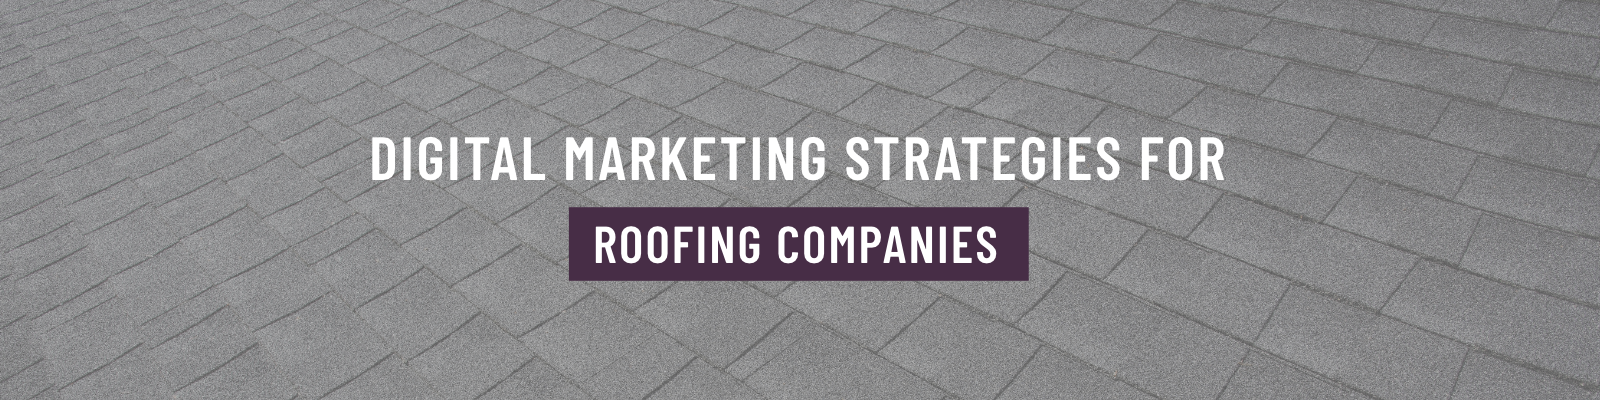 12 Digital Roofing Marketing Strategies That Work for Roofing Companies